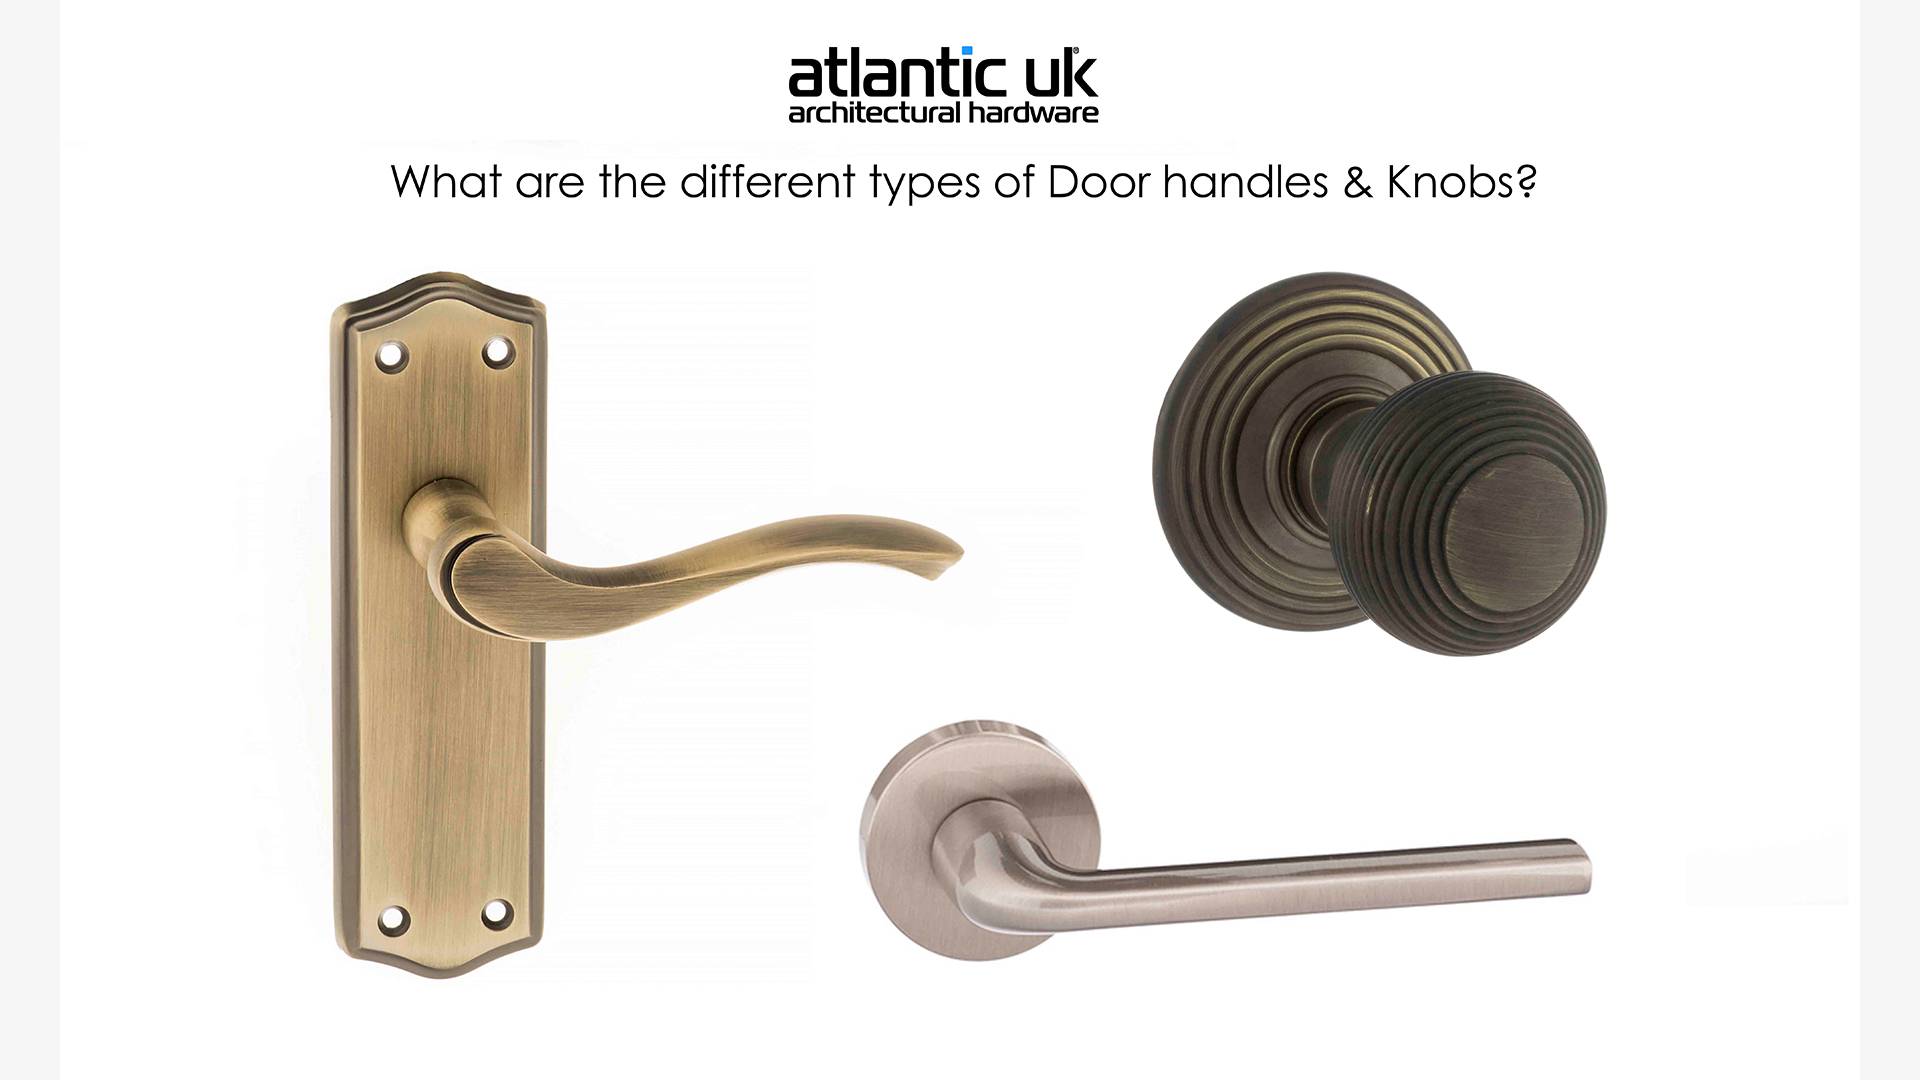 What are the different types of Door Handles & Knobs?